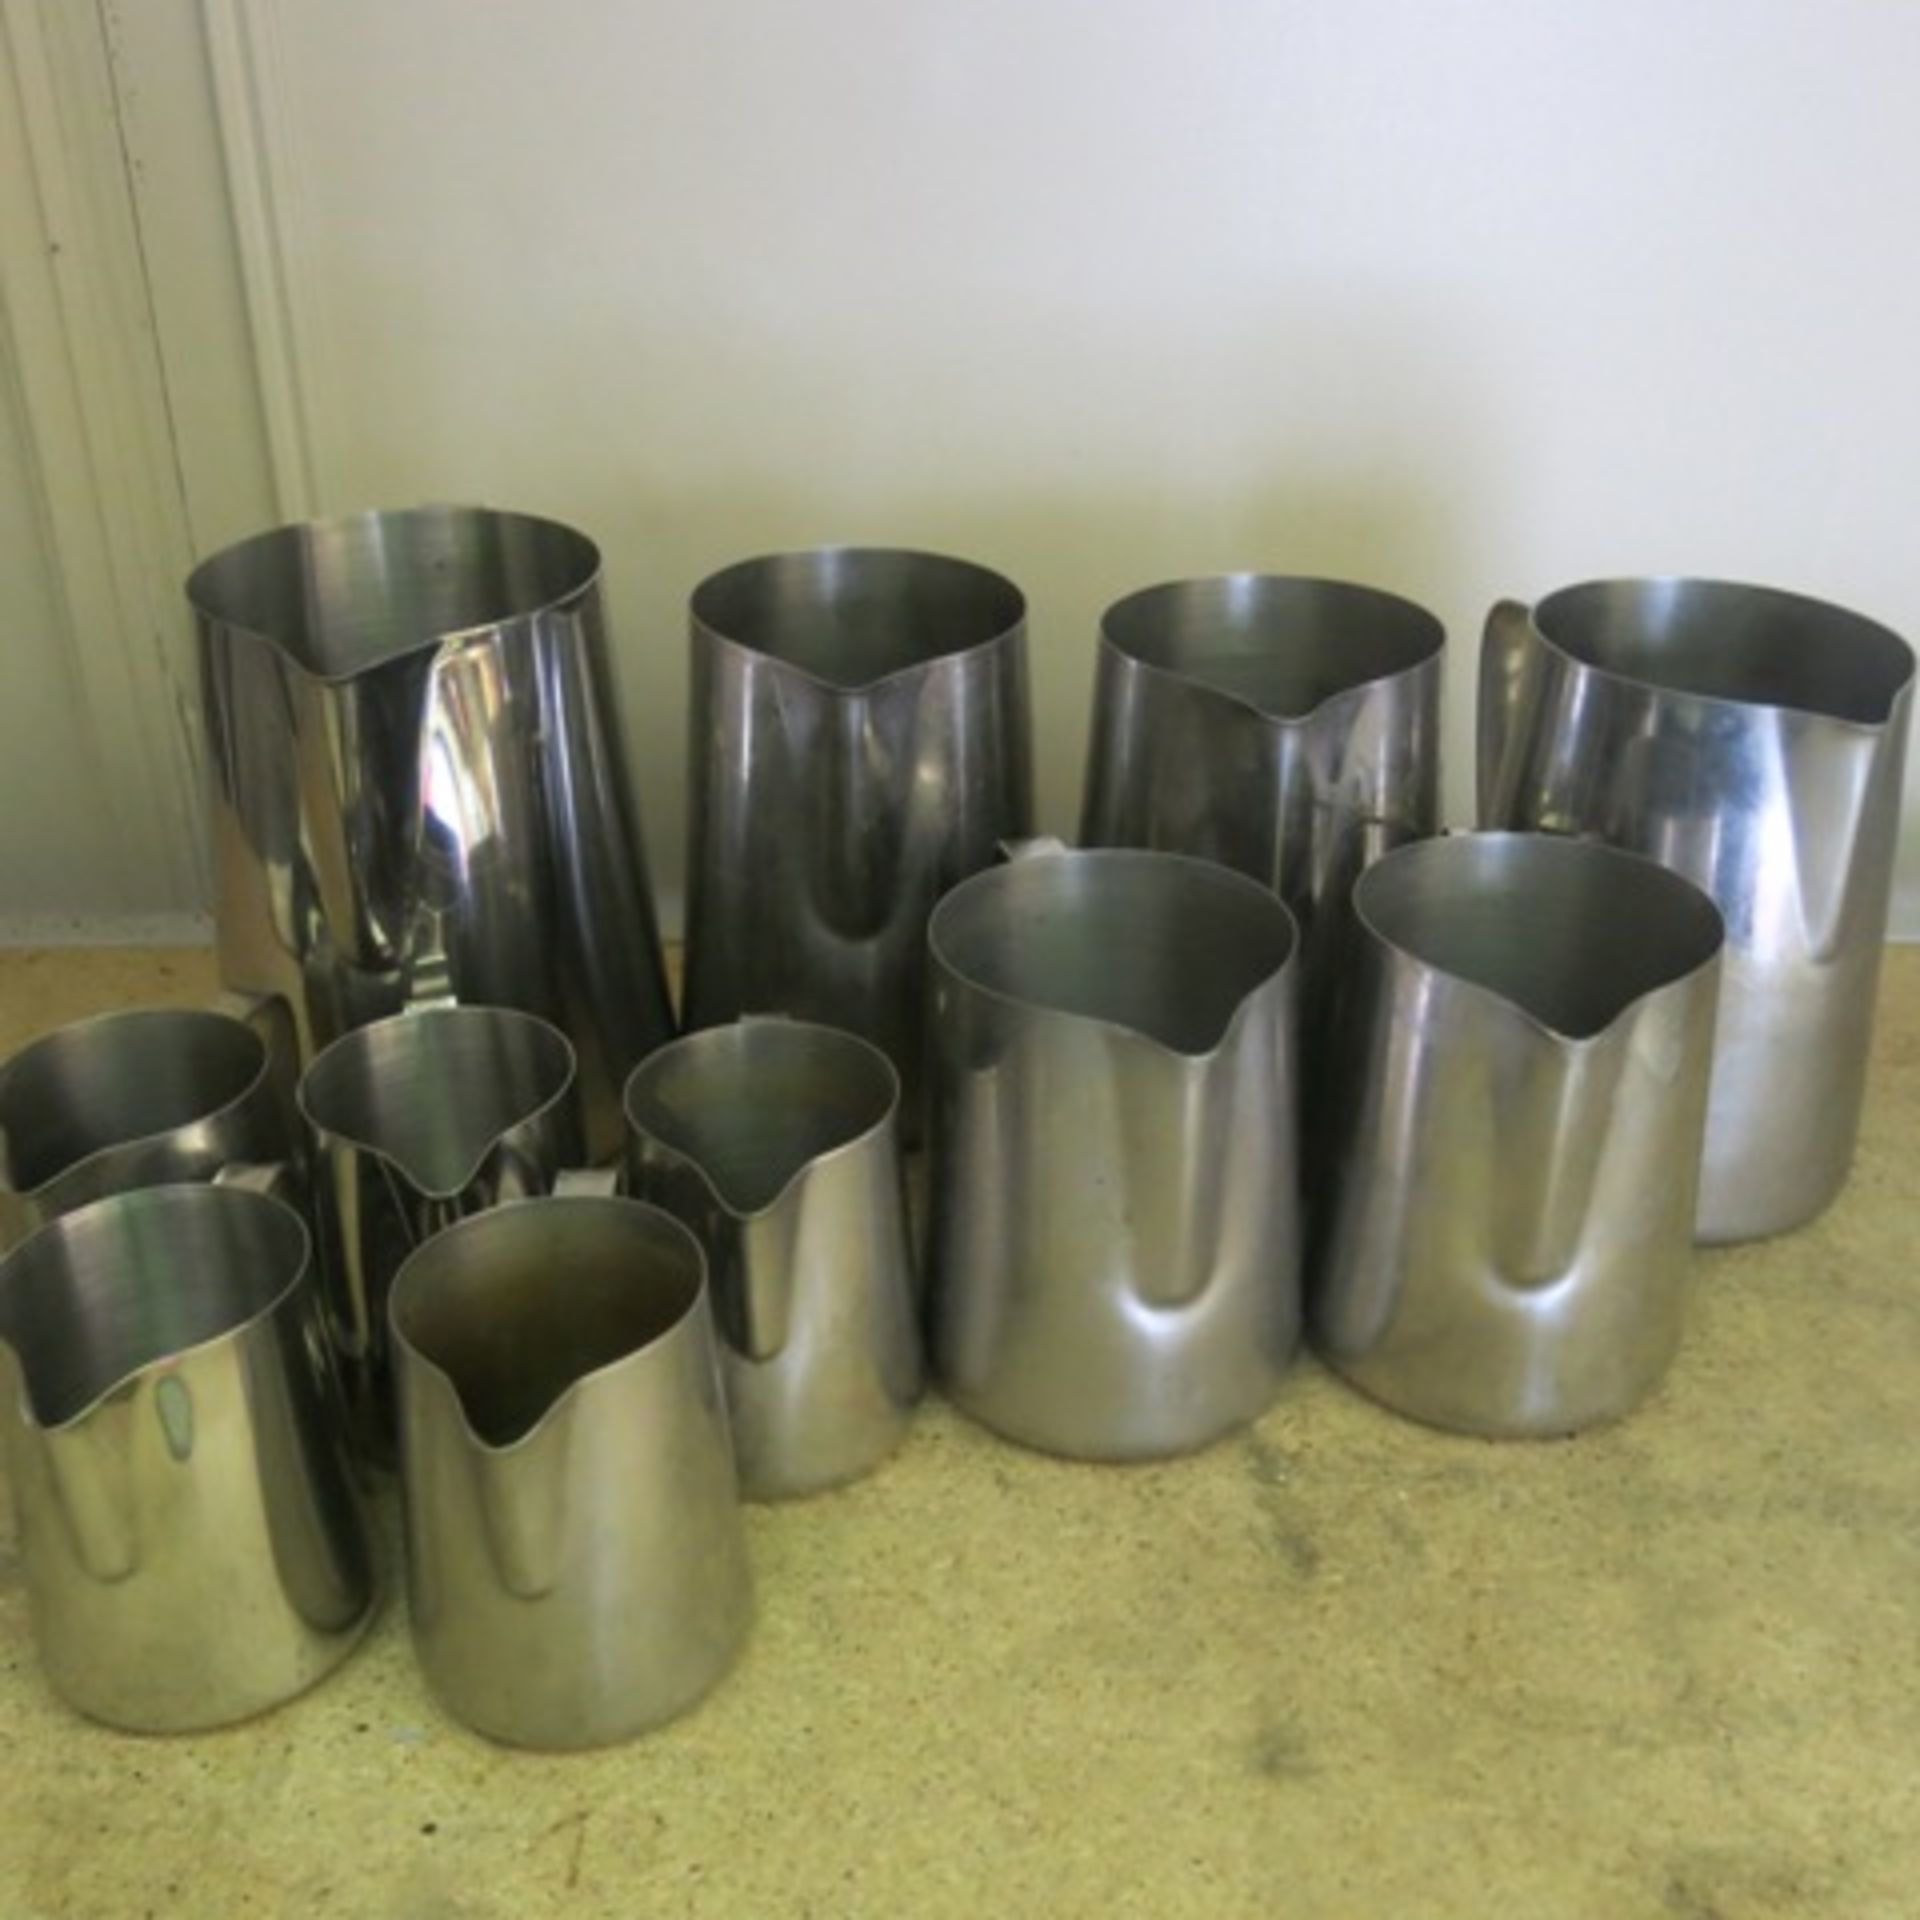 13 x Assorted Sized Stainless Steel Milk Jugs